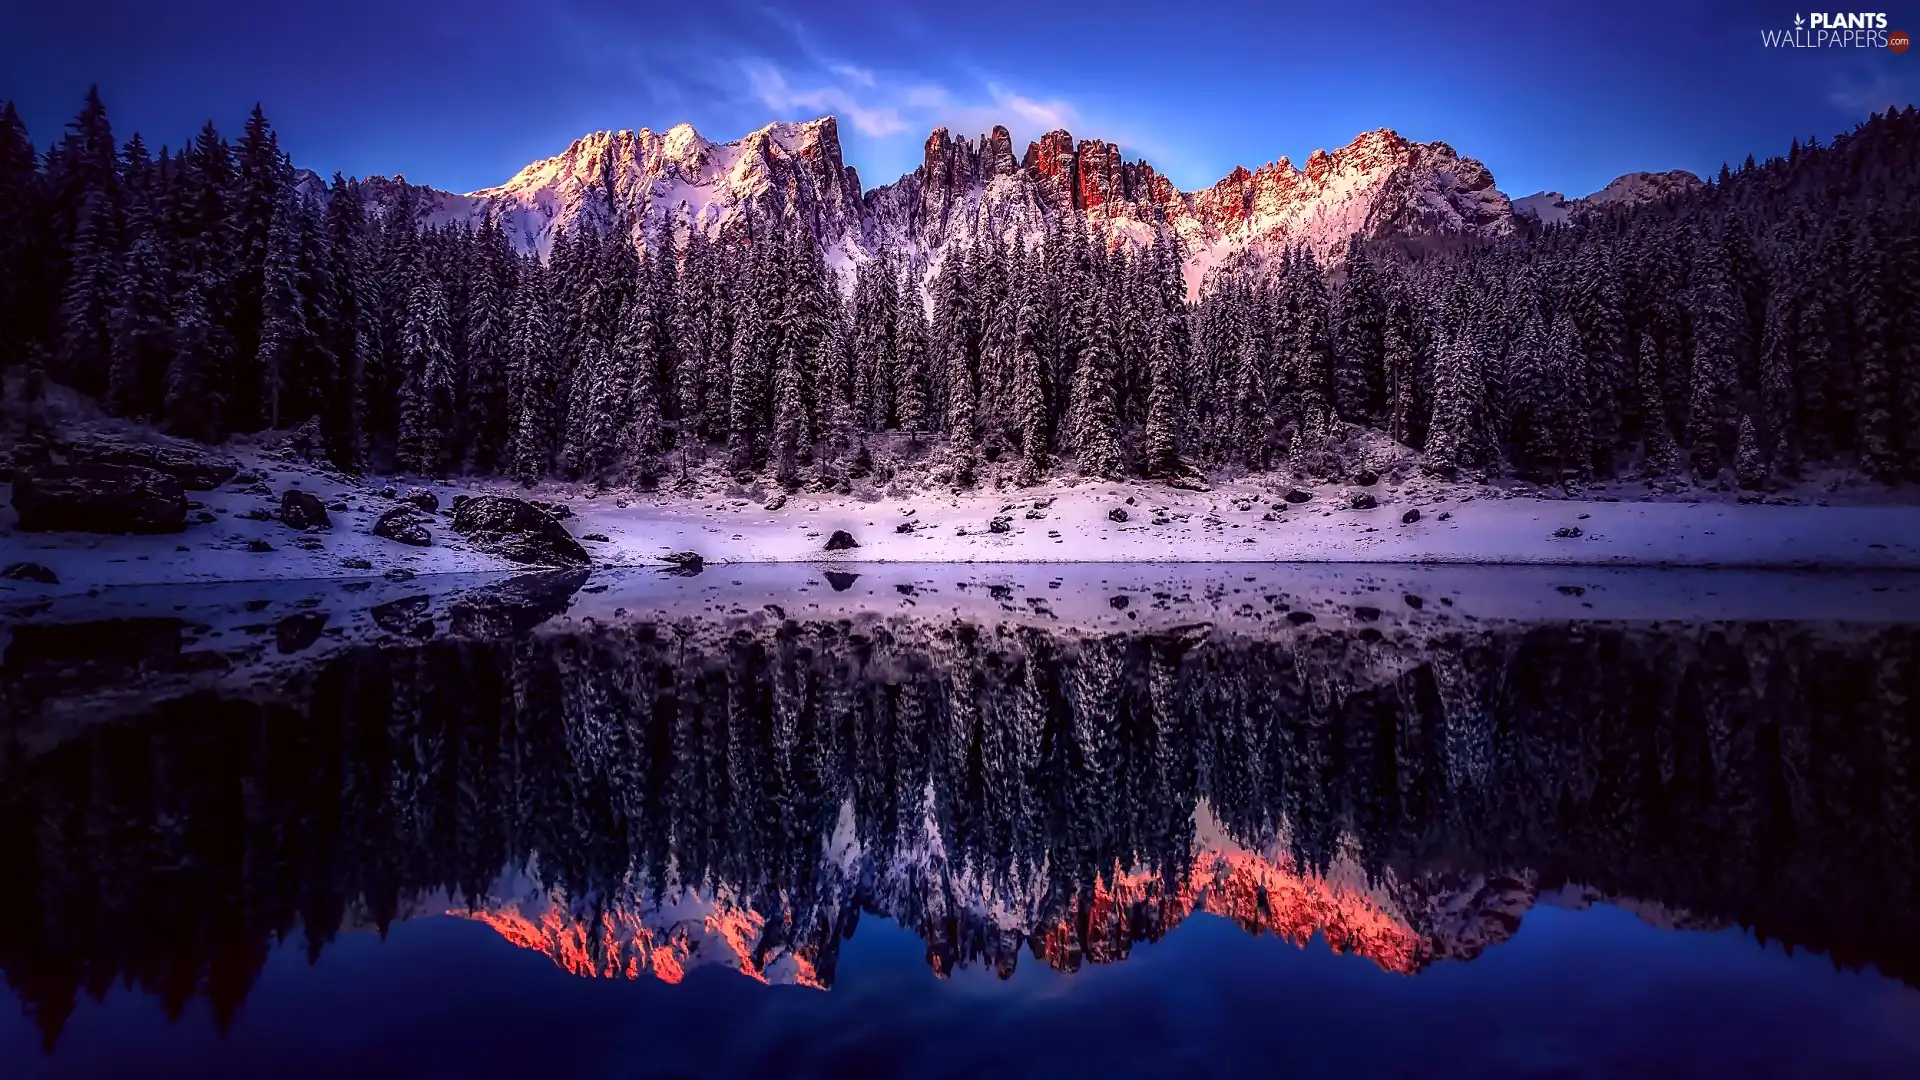 Province of Bolzano, Italy, Karersee Lake, Dolomites Mountains, reflection, snow, viewes, forest, trees